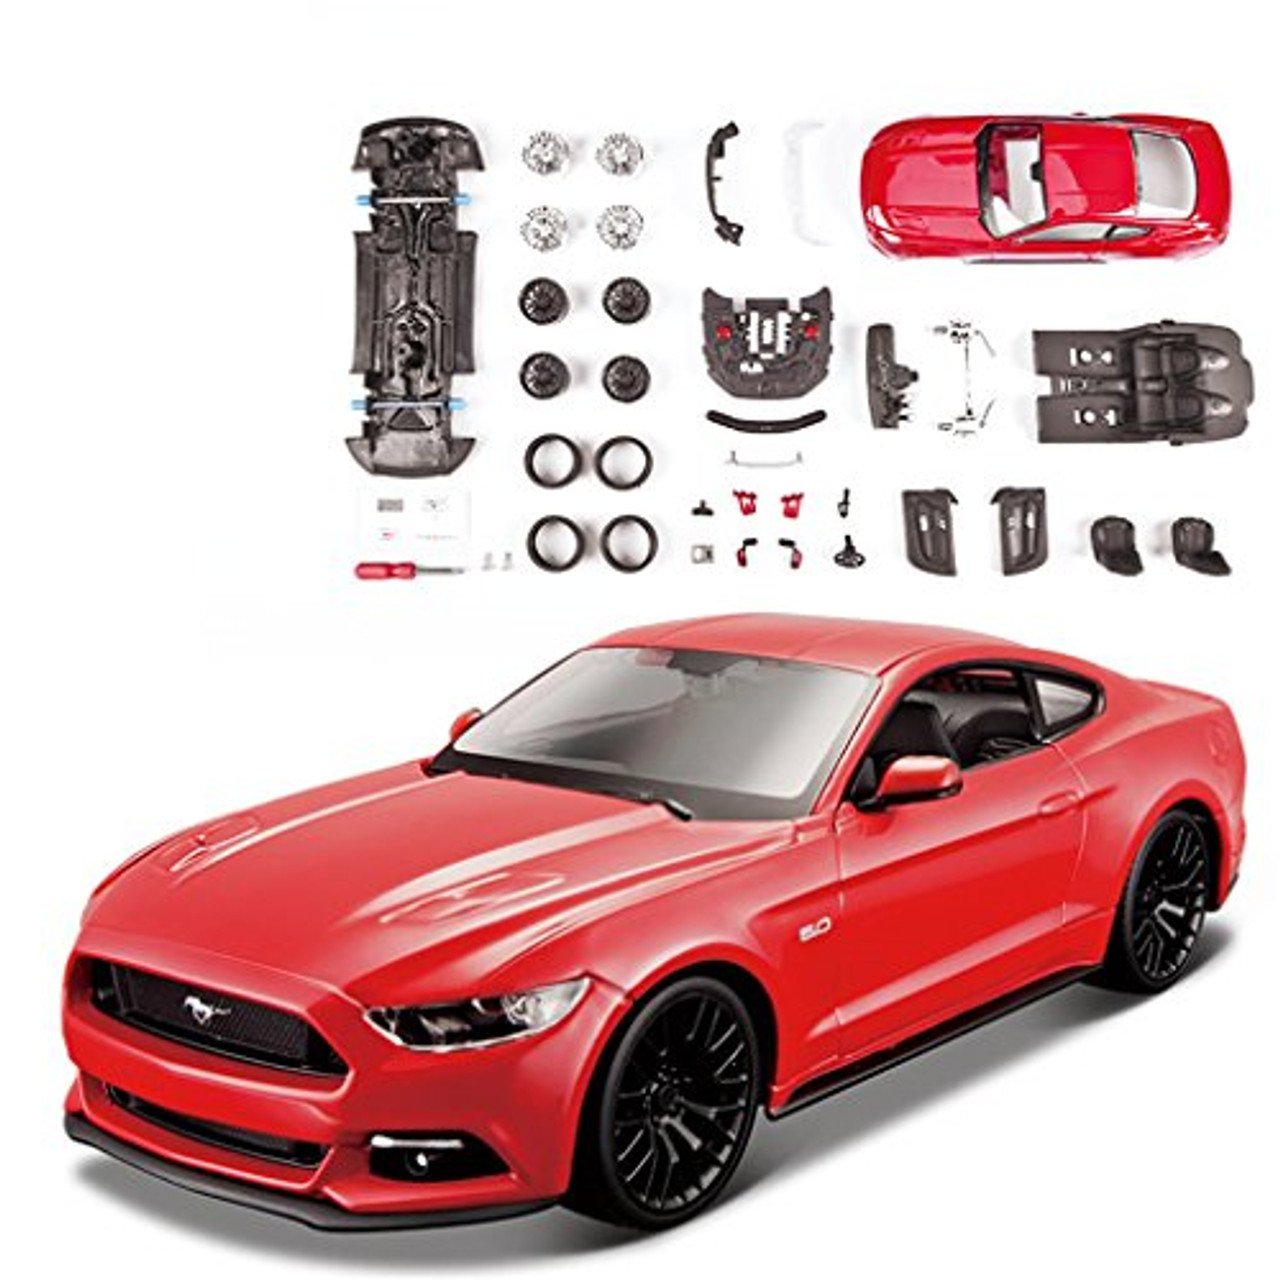 DR6, Miniature Ford Mustang GT 2015 rouge 1/24